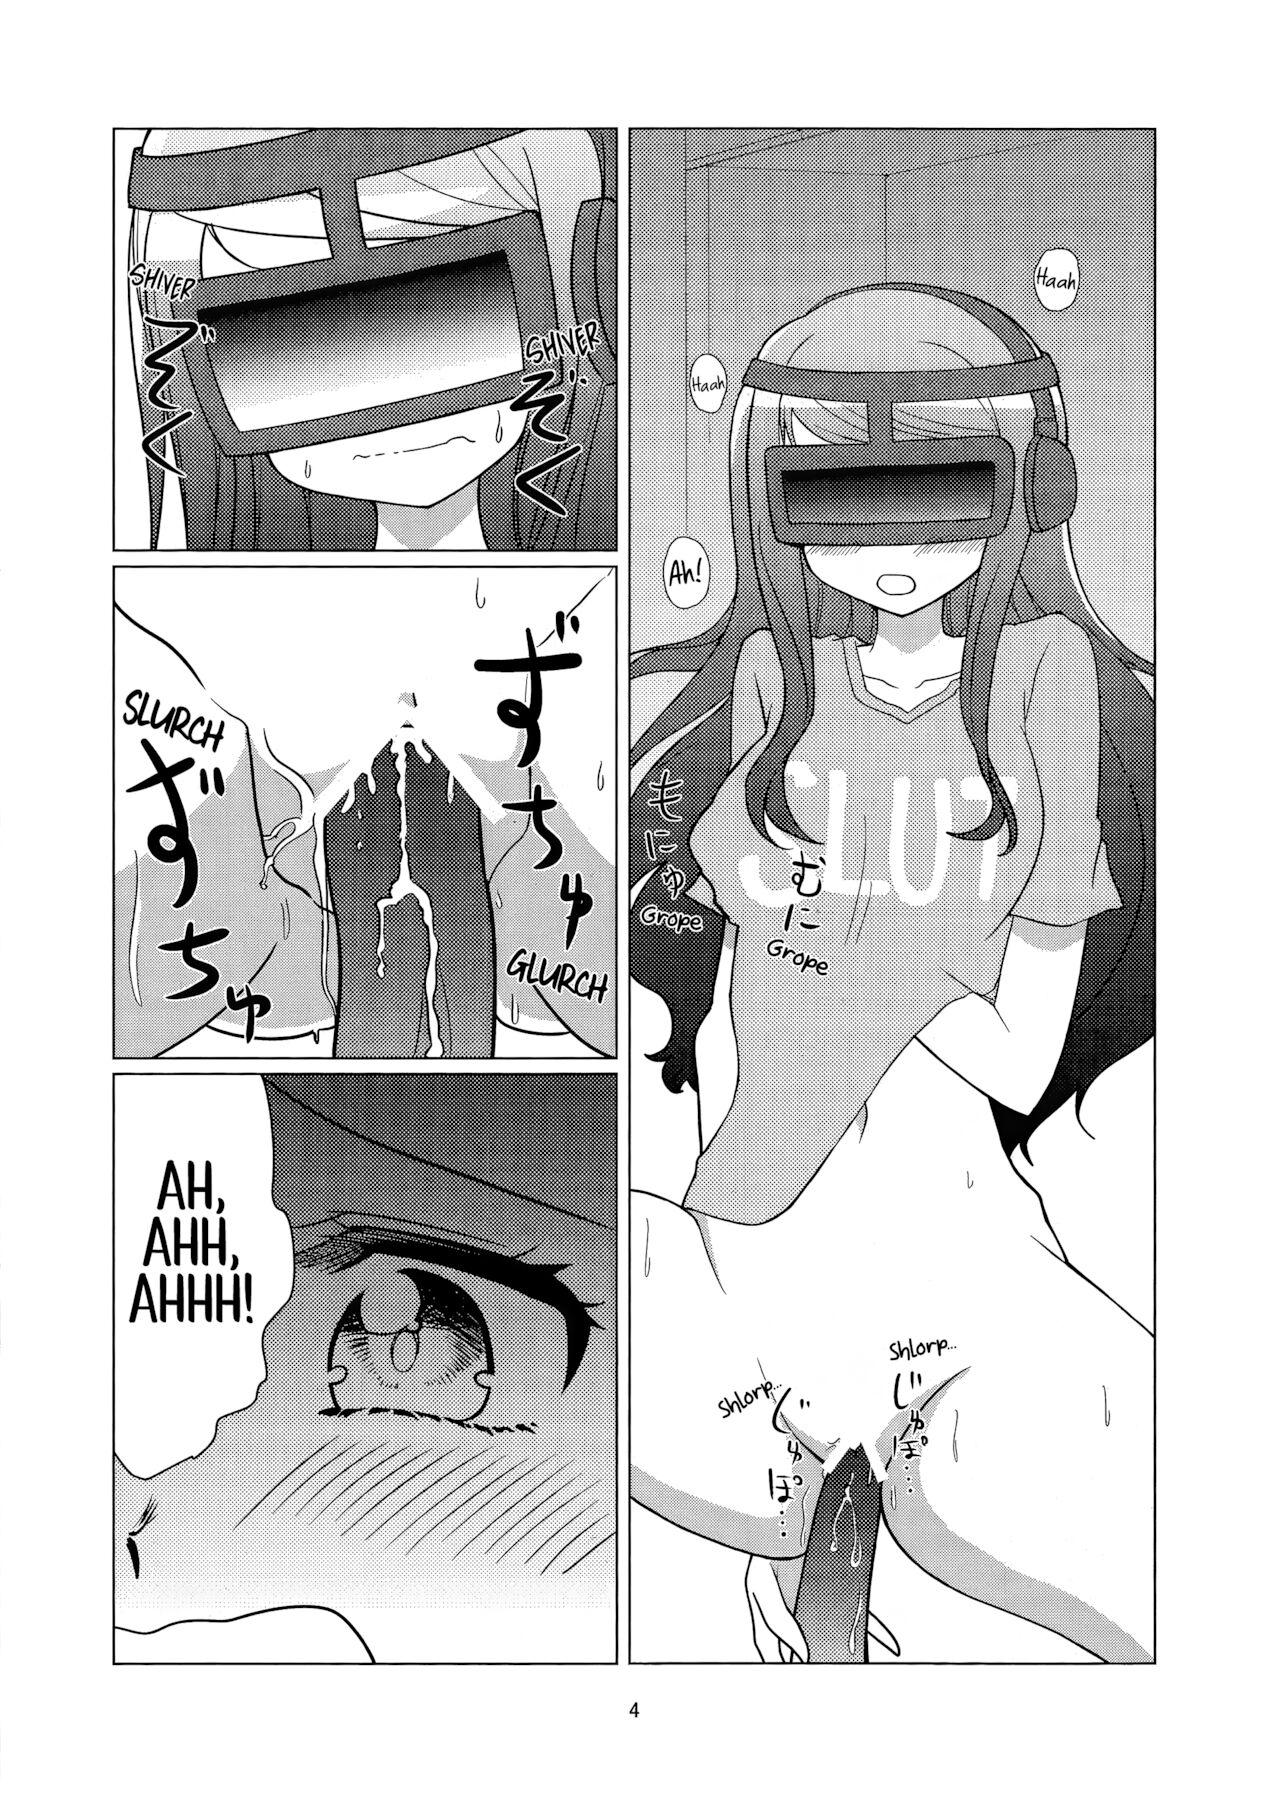 Breasts Angel's Share - Va-11 hall-a Pure 18 - Page 3